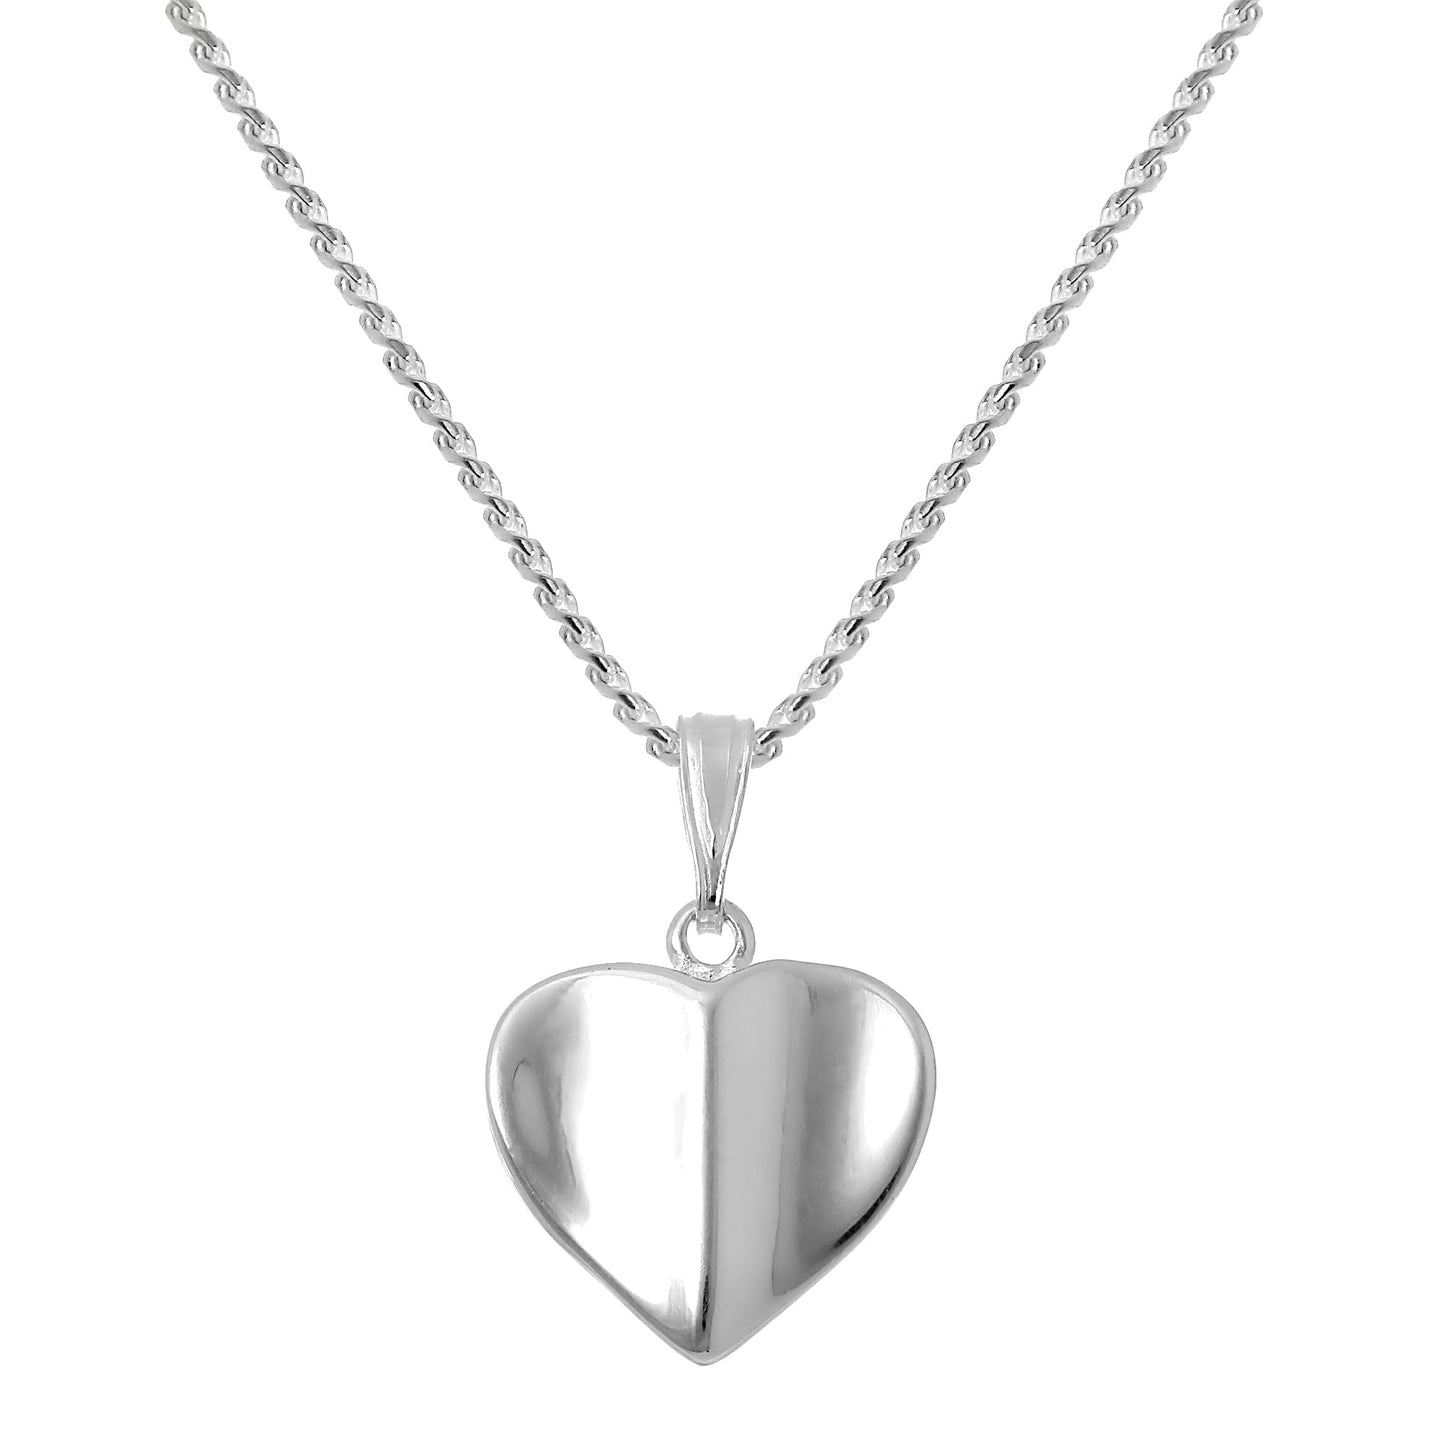 Sterling Silver Heart Pendant Necklace 16 - 22 Inches